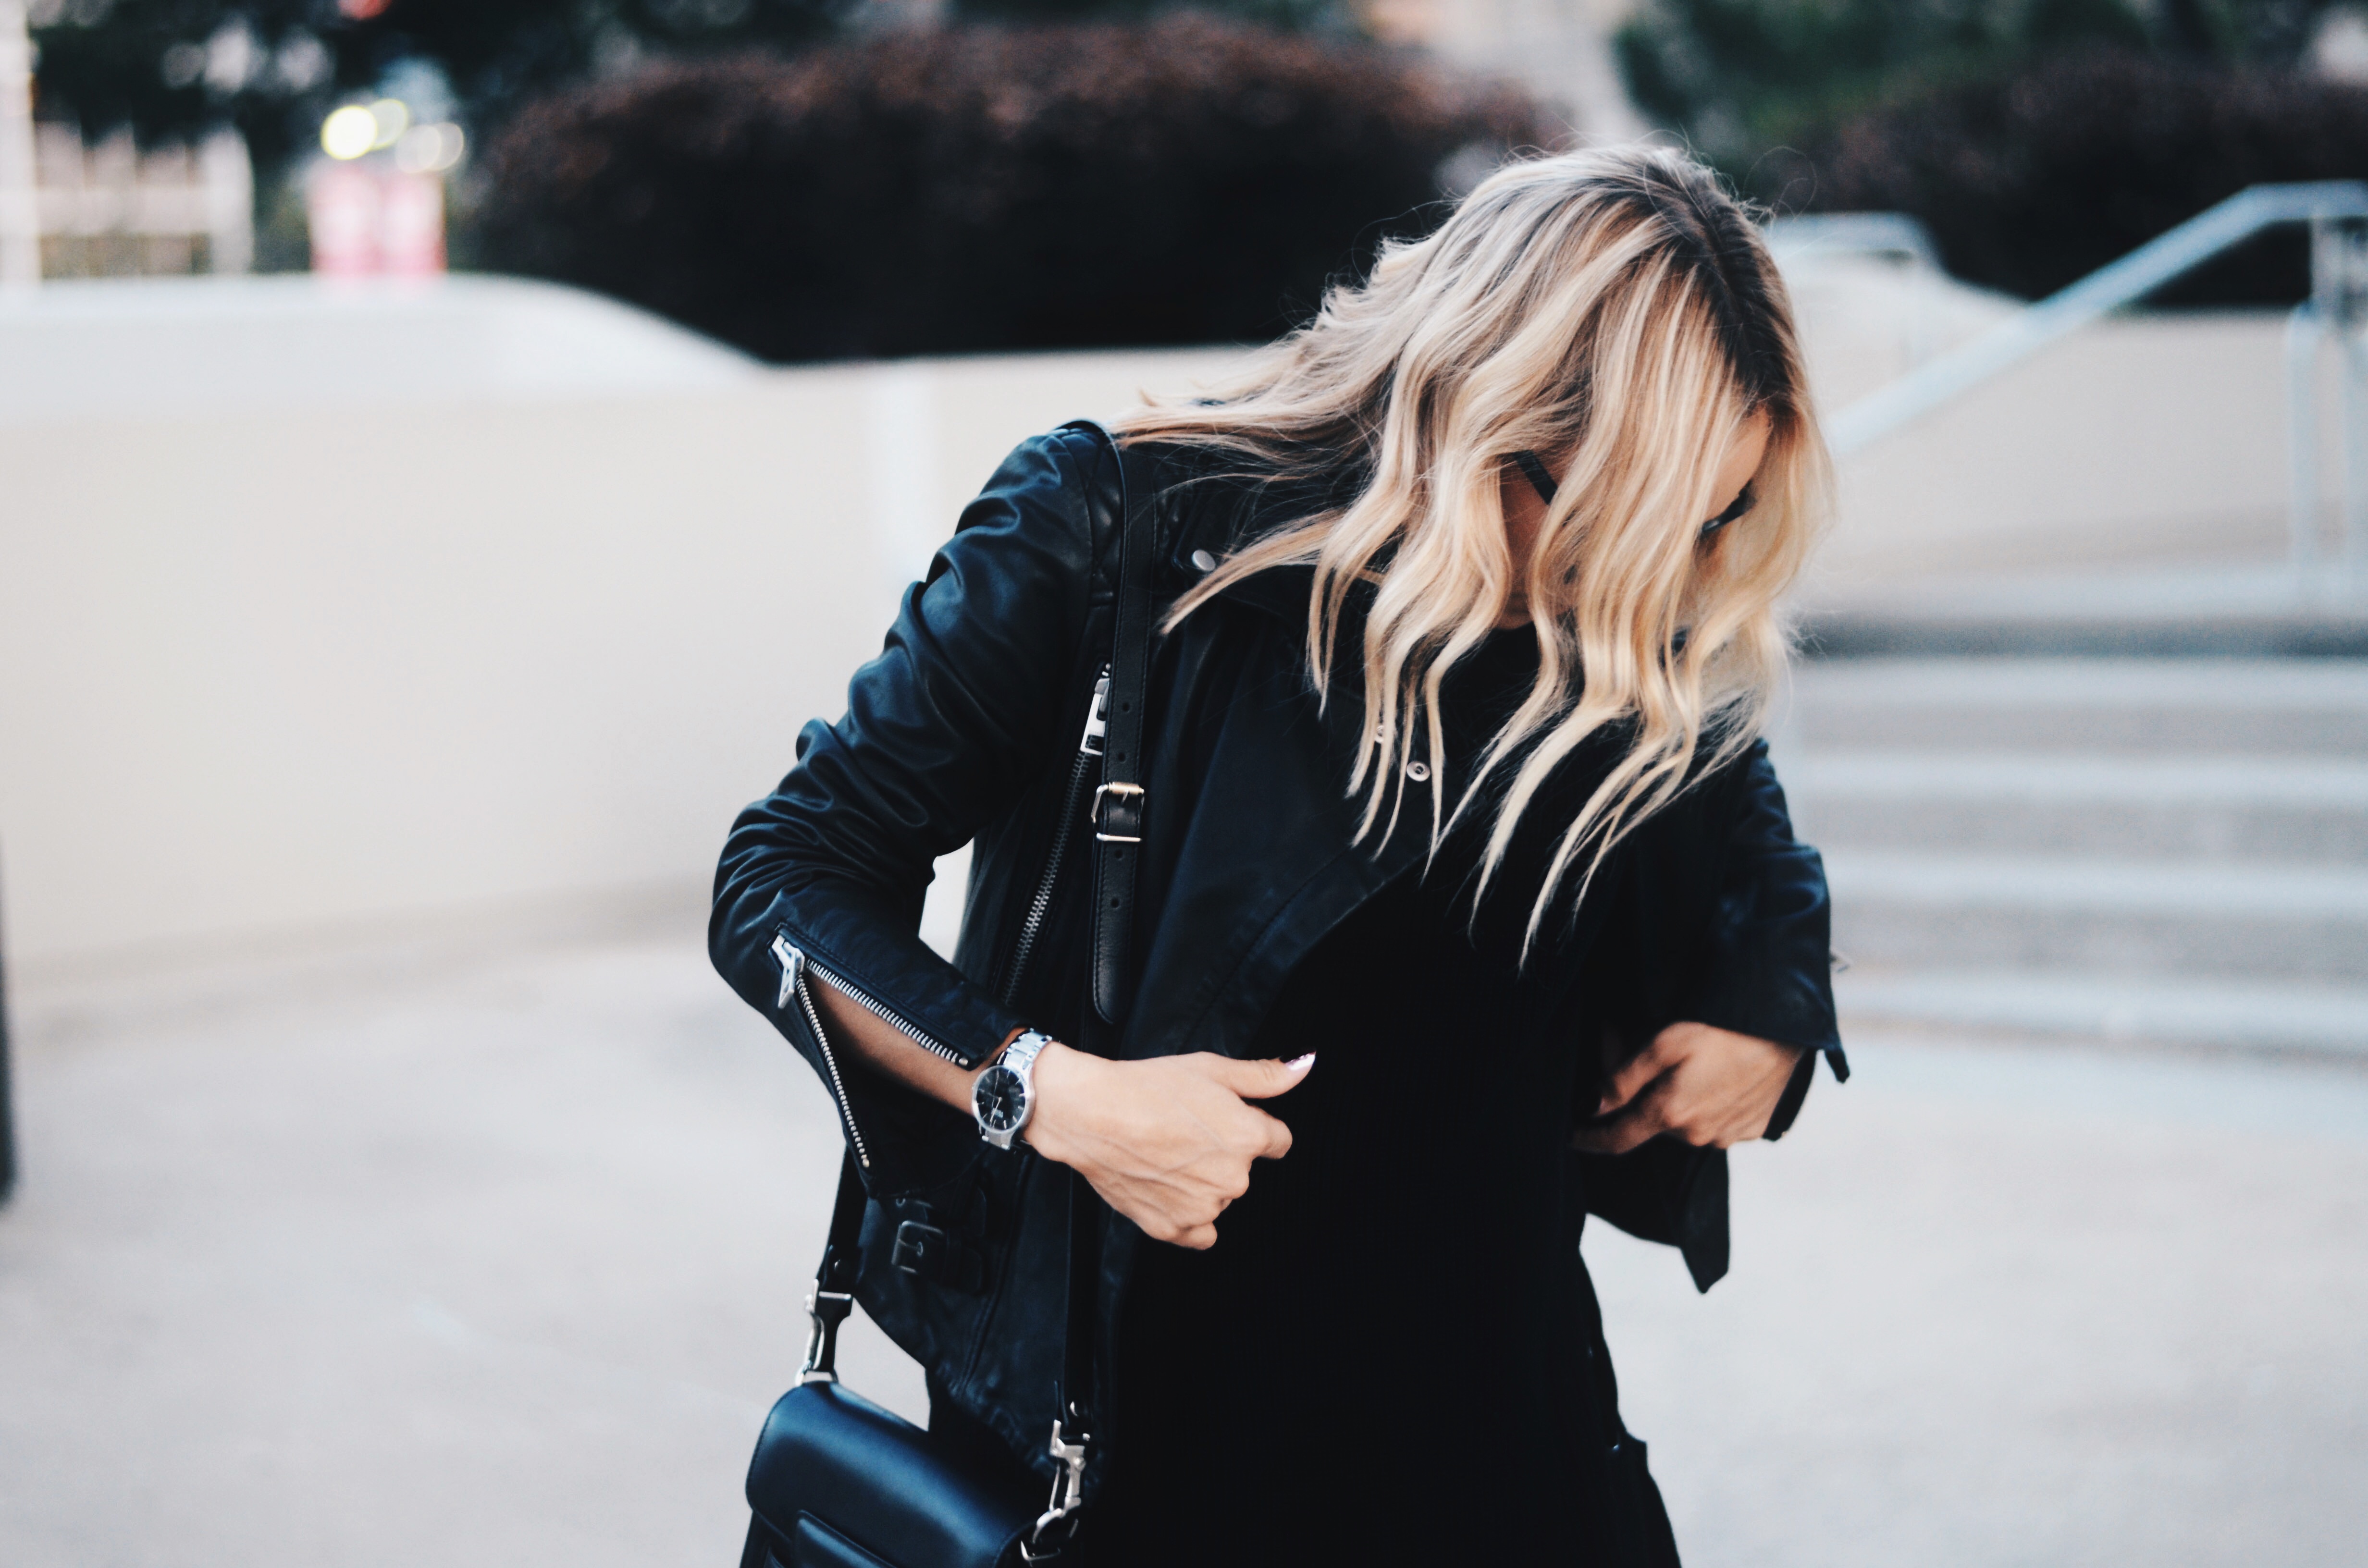 How to style a leather jacket for fall